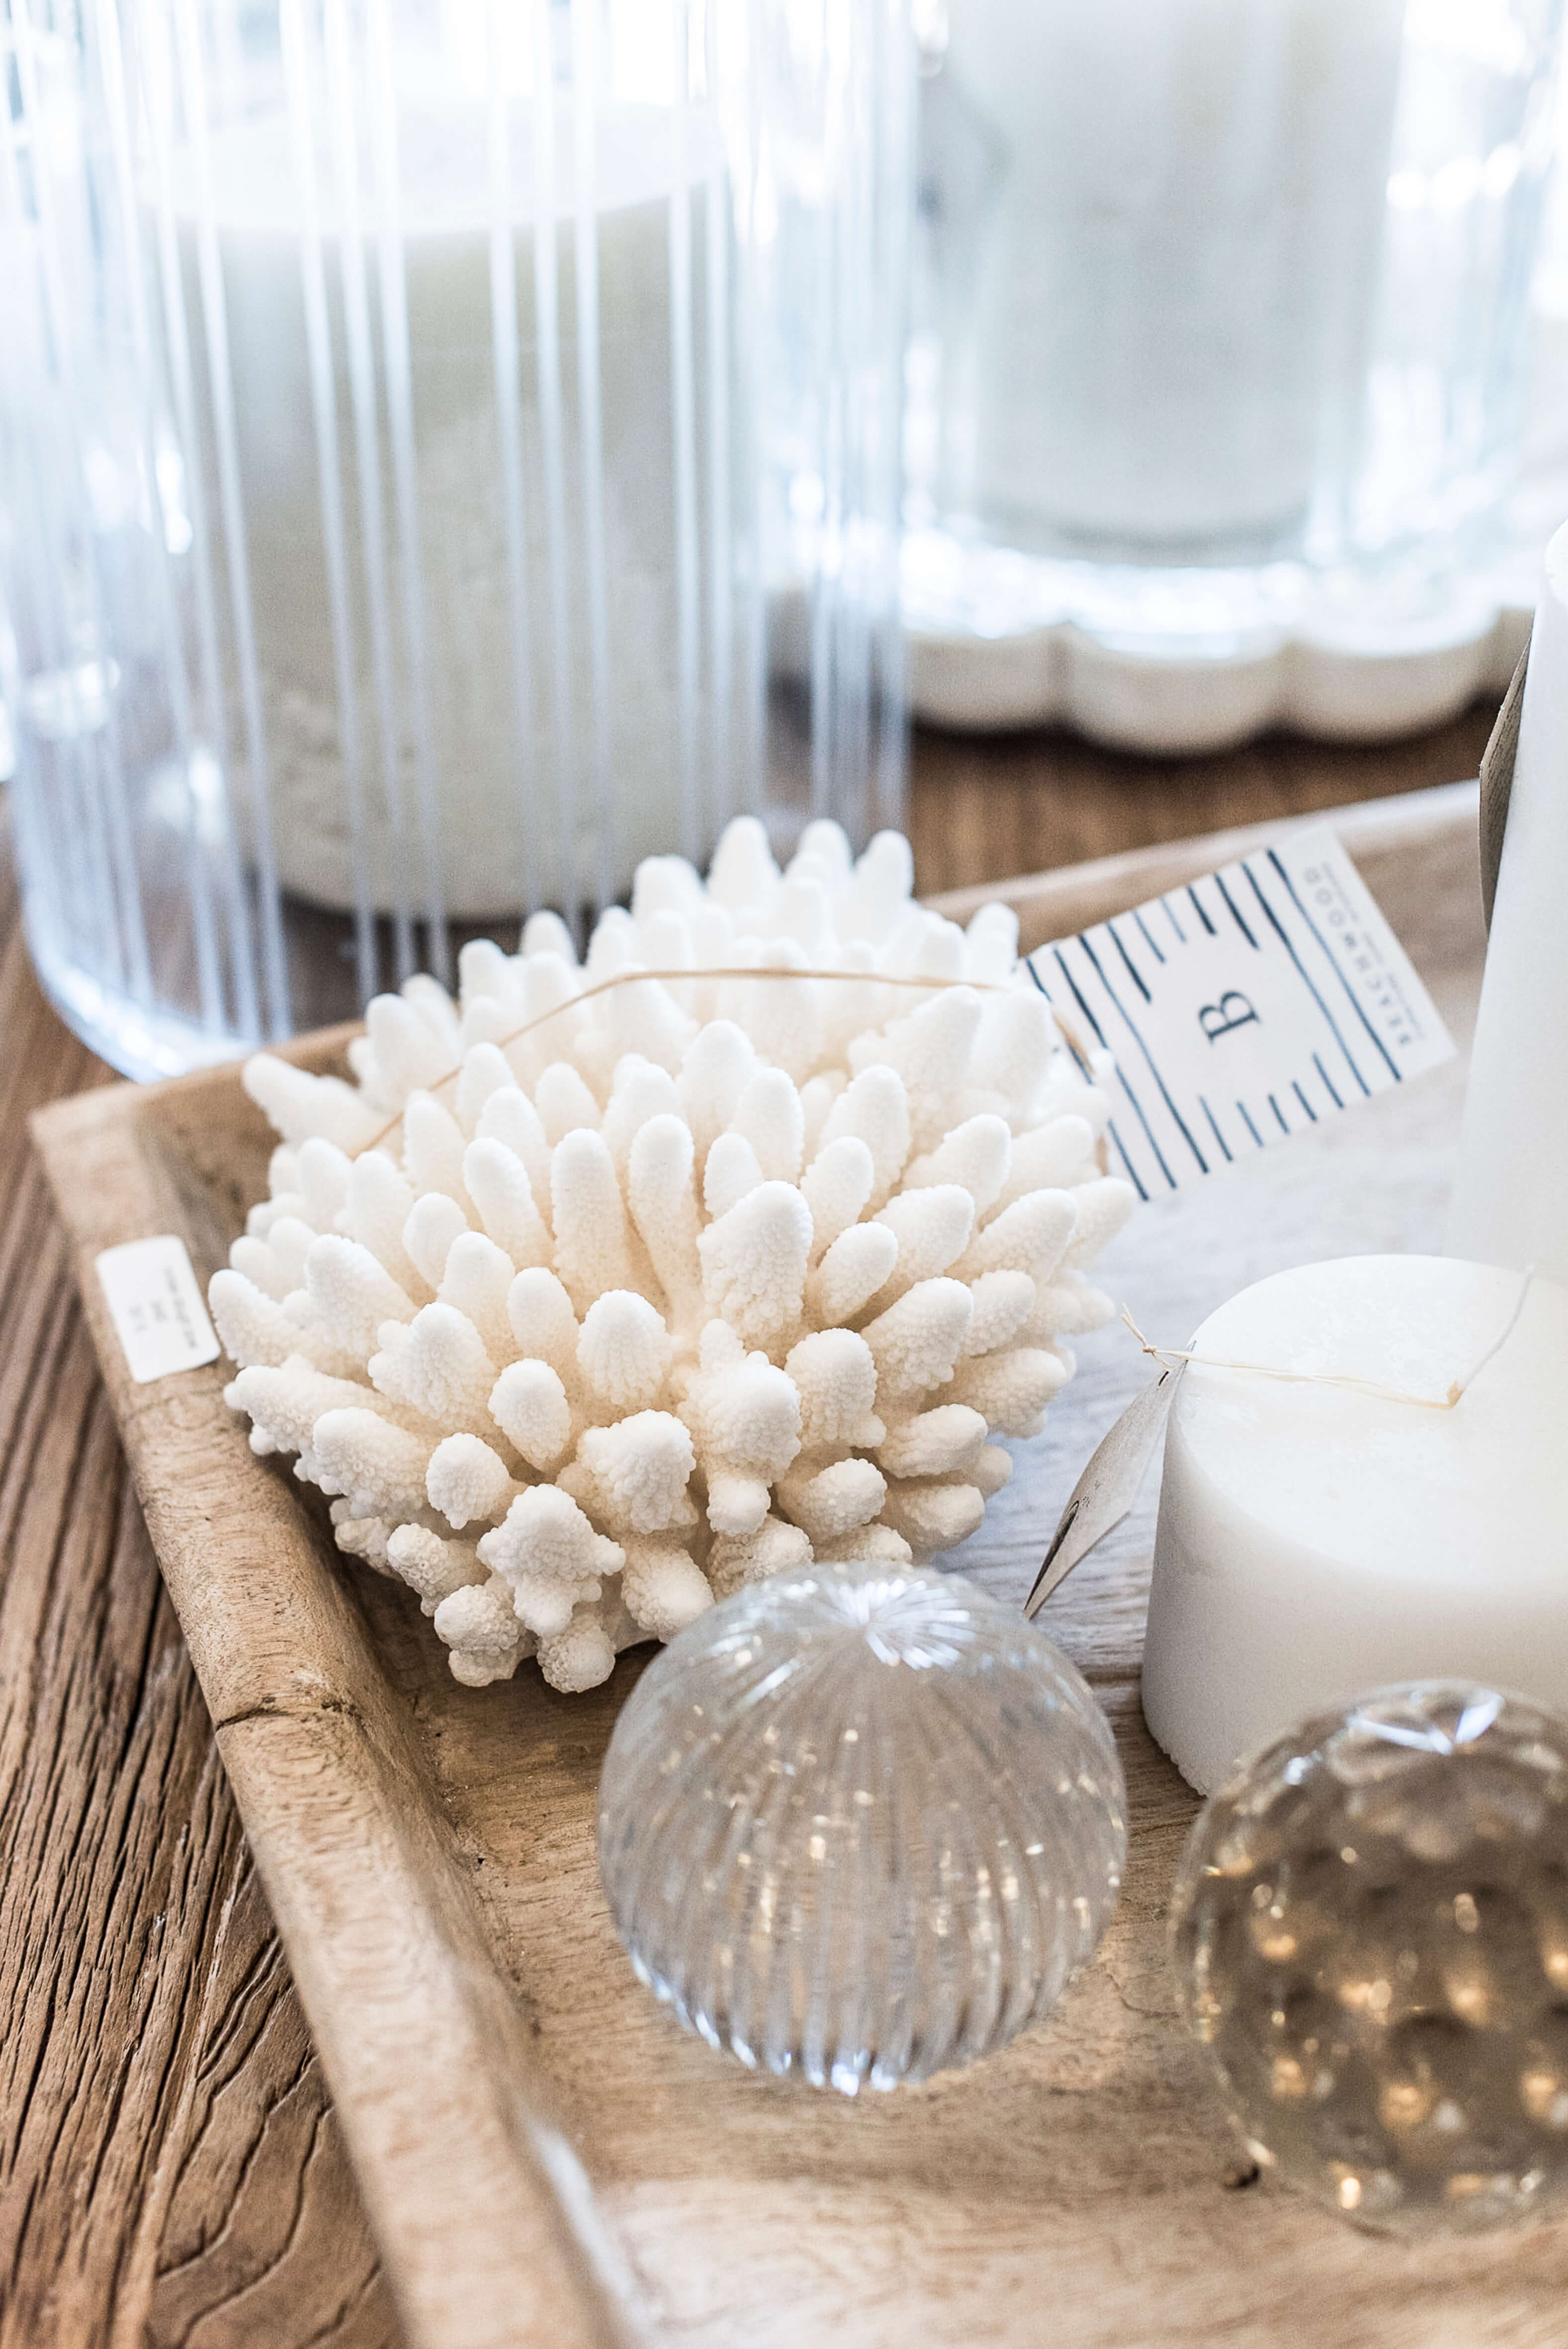 Artistic tabletop display featuring a white decorative coral piece, scented candle, and clear glass accents on a rustic wooden tray, perfect for a chic home decor inspiration